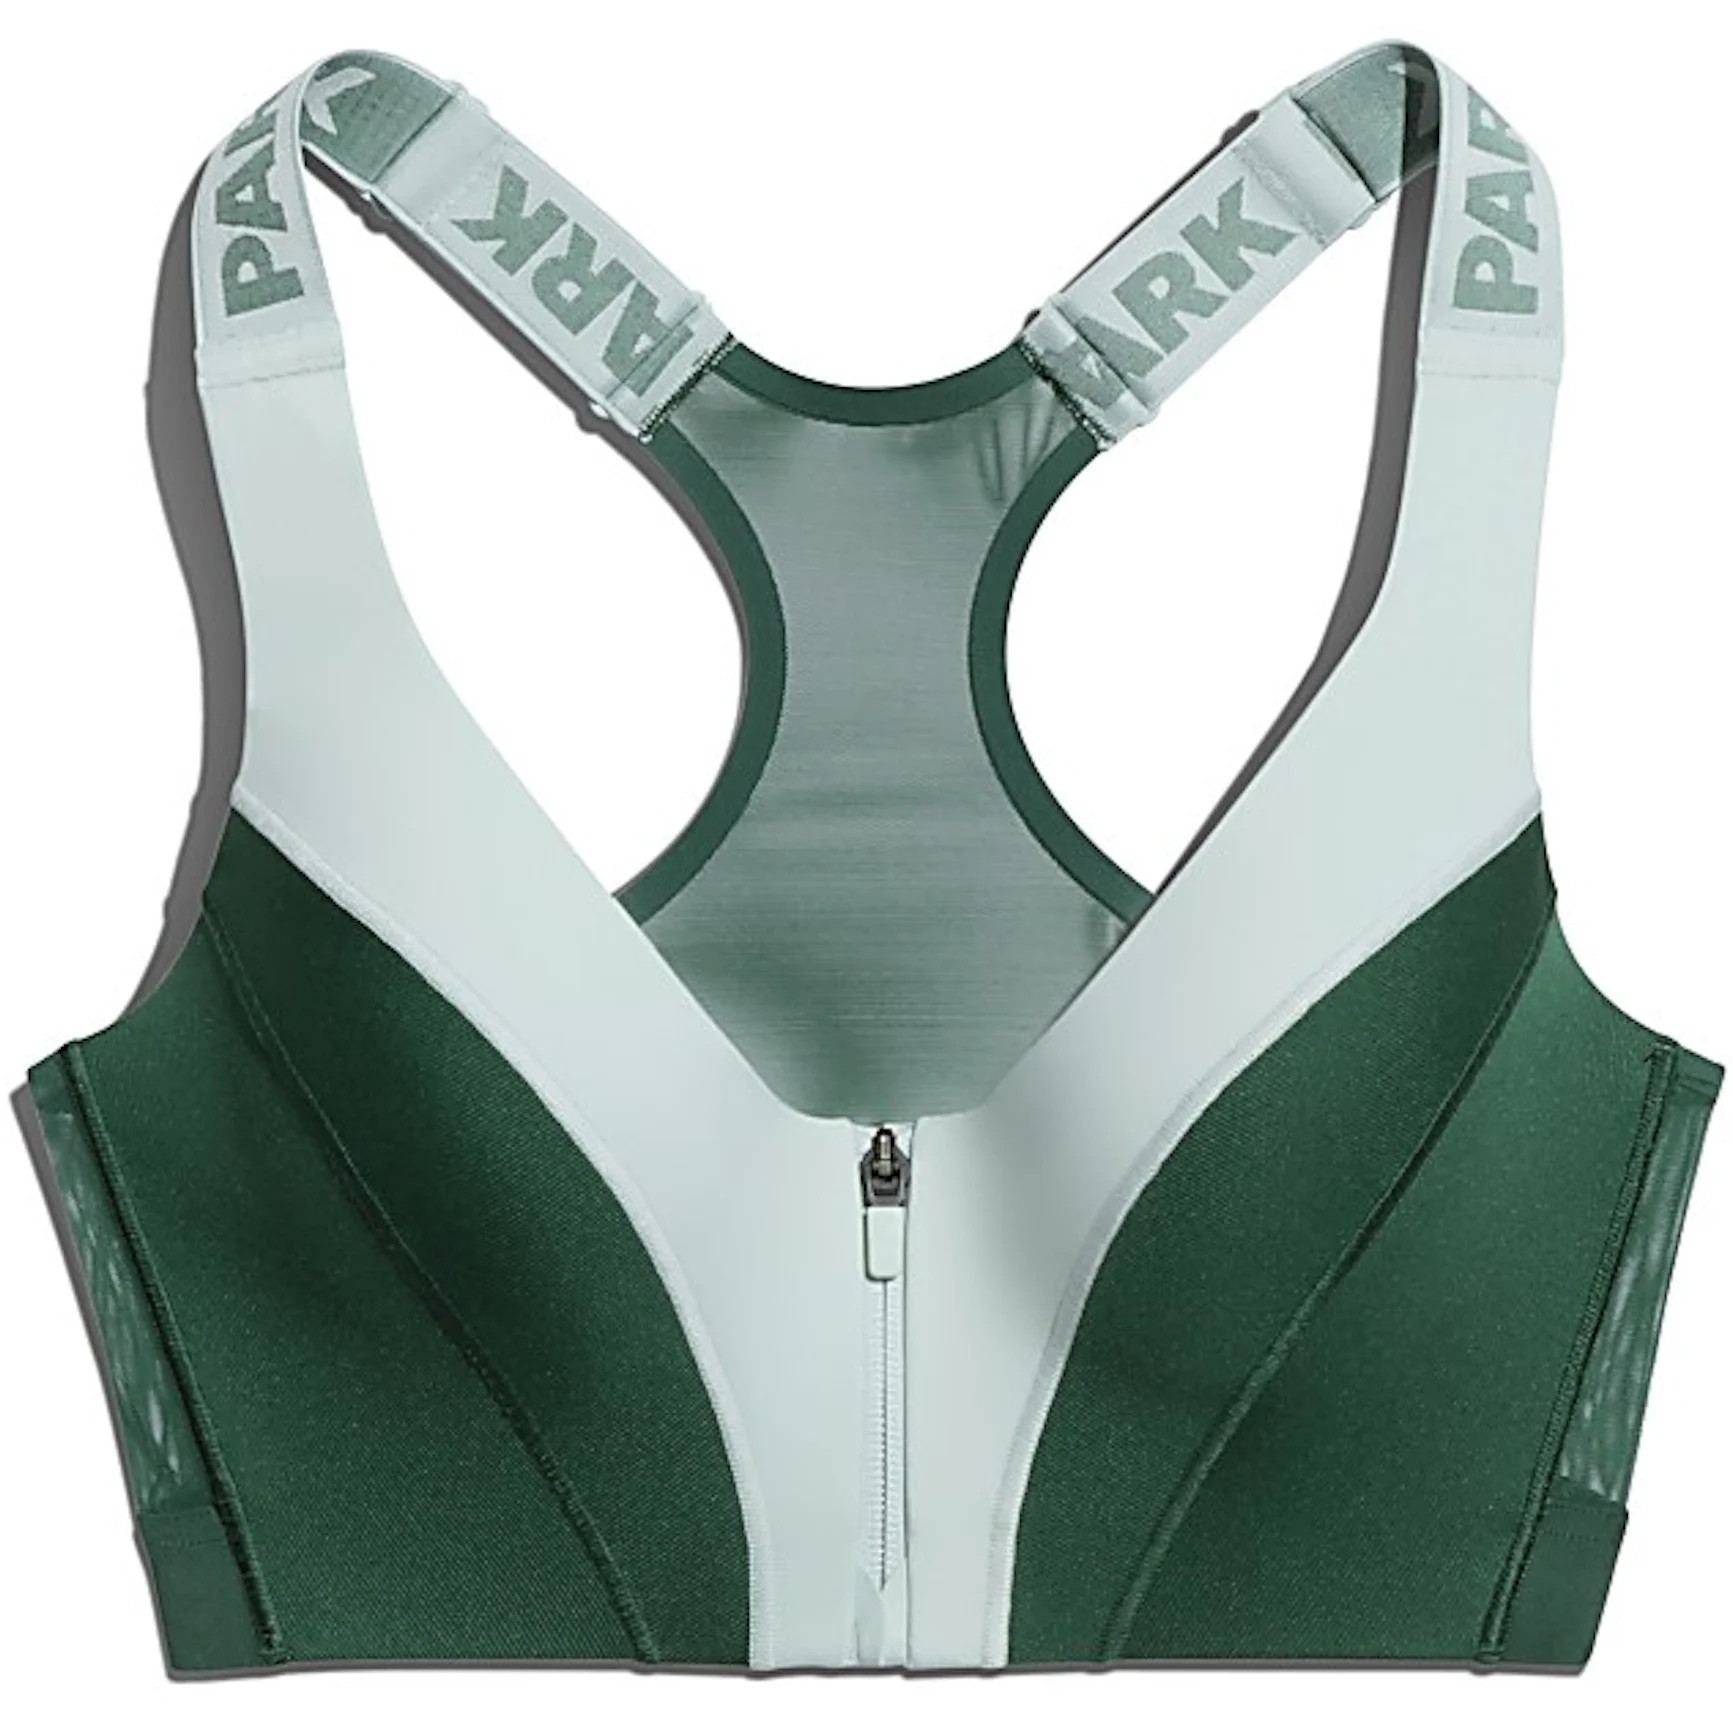 Adidas IVY PARK Drip 2 size 4X Sports bra - $108 New With Tags - From Abigal